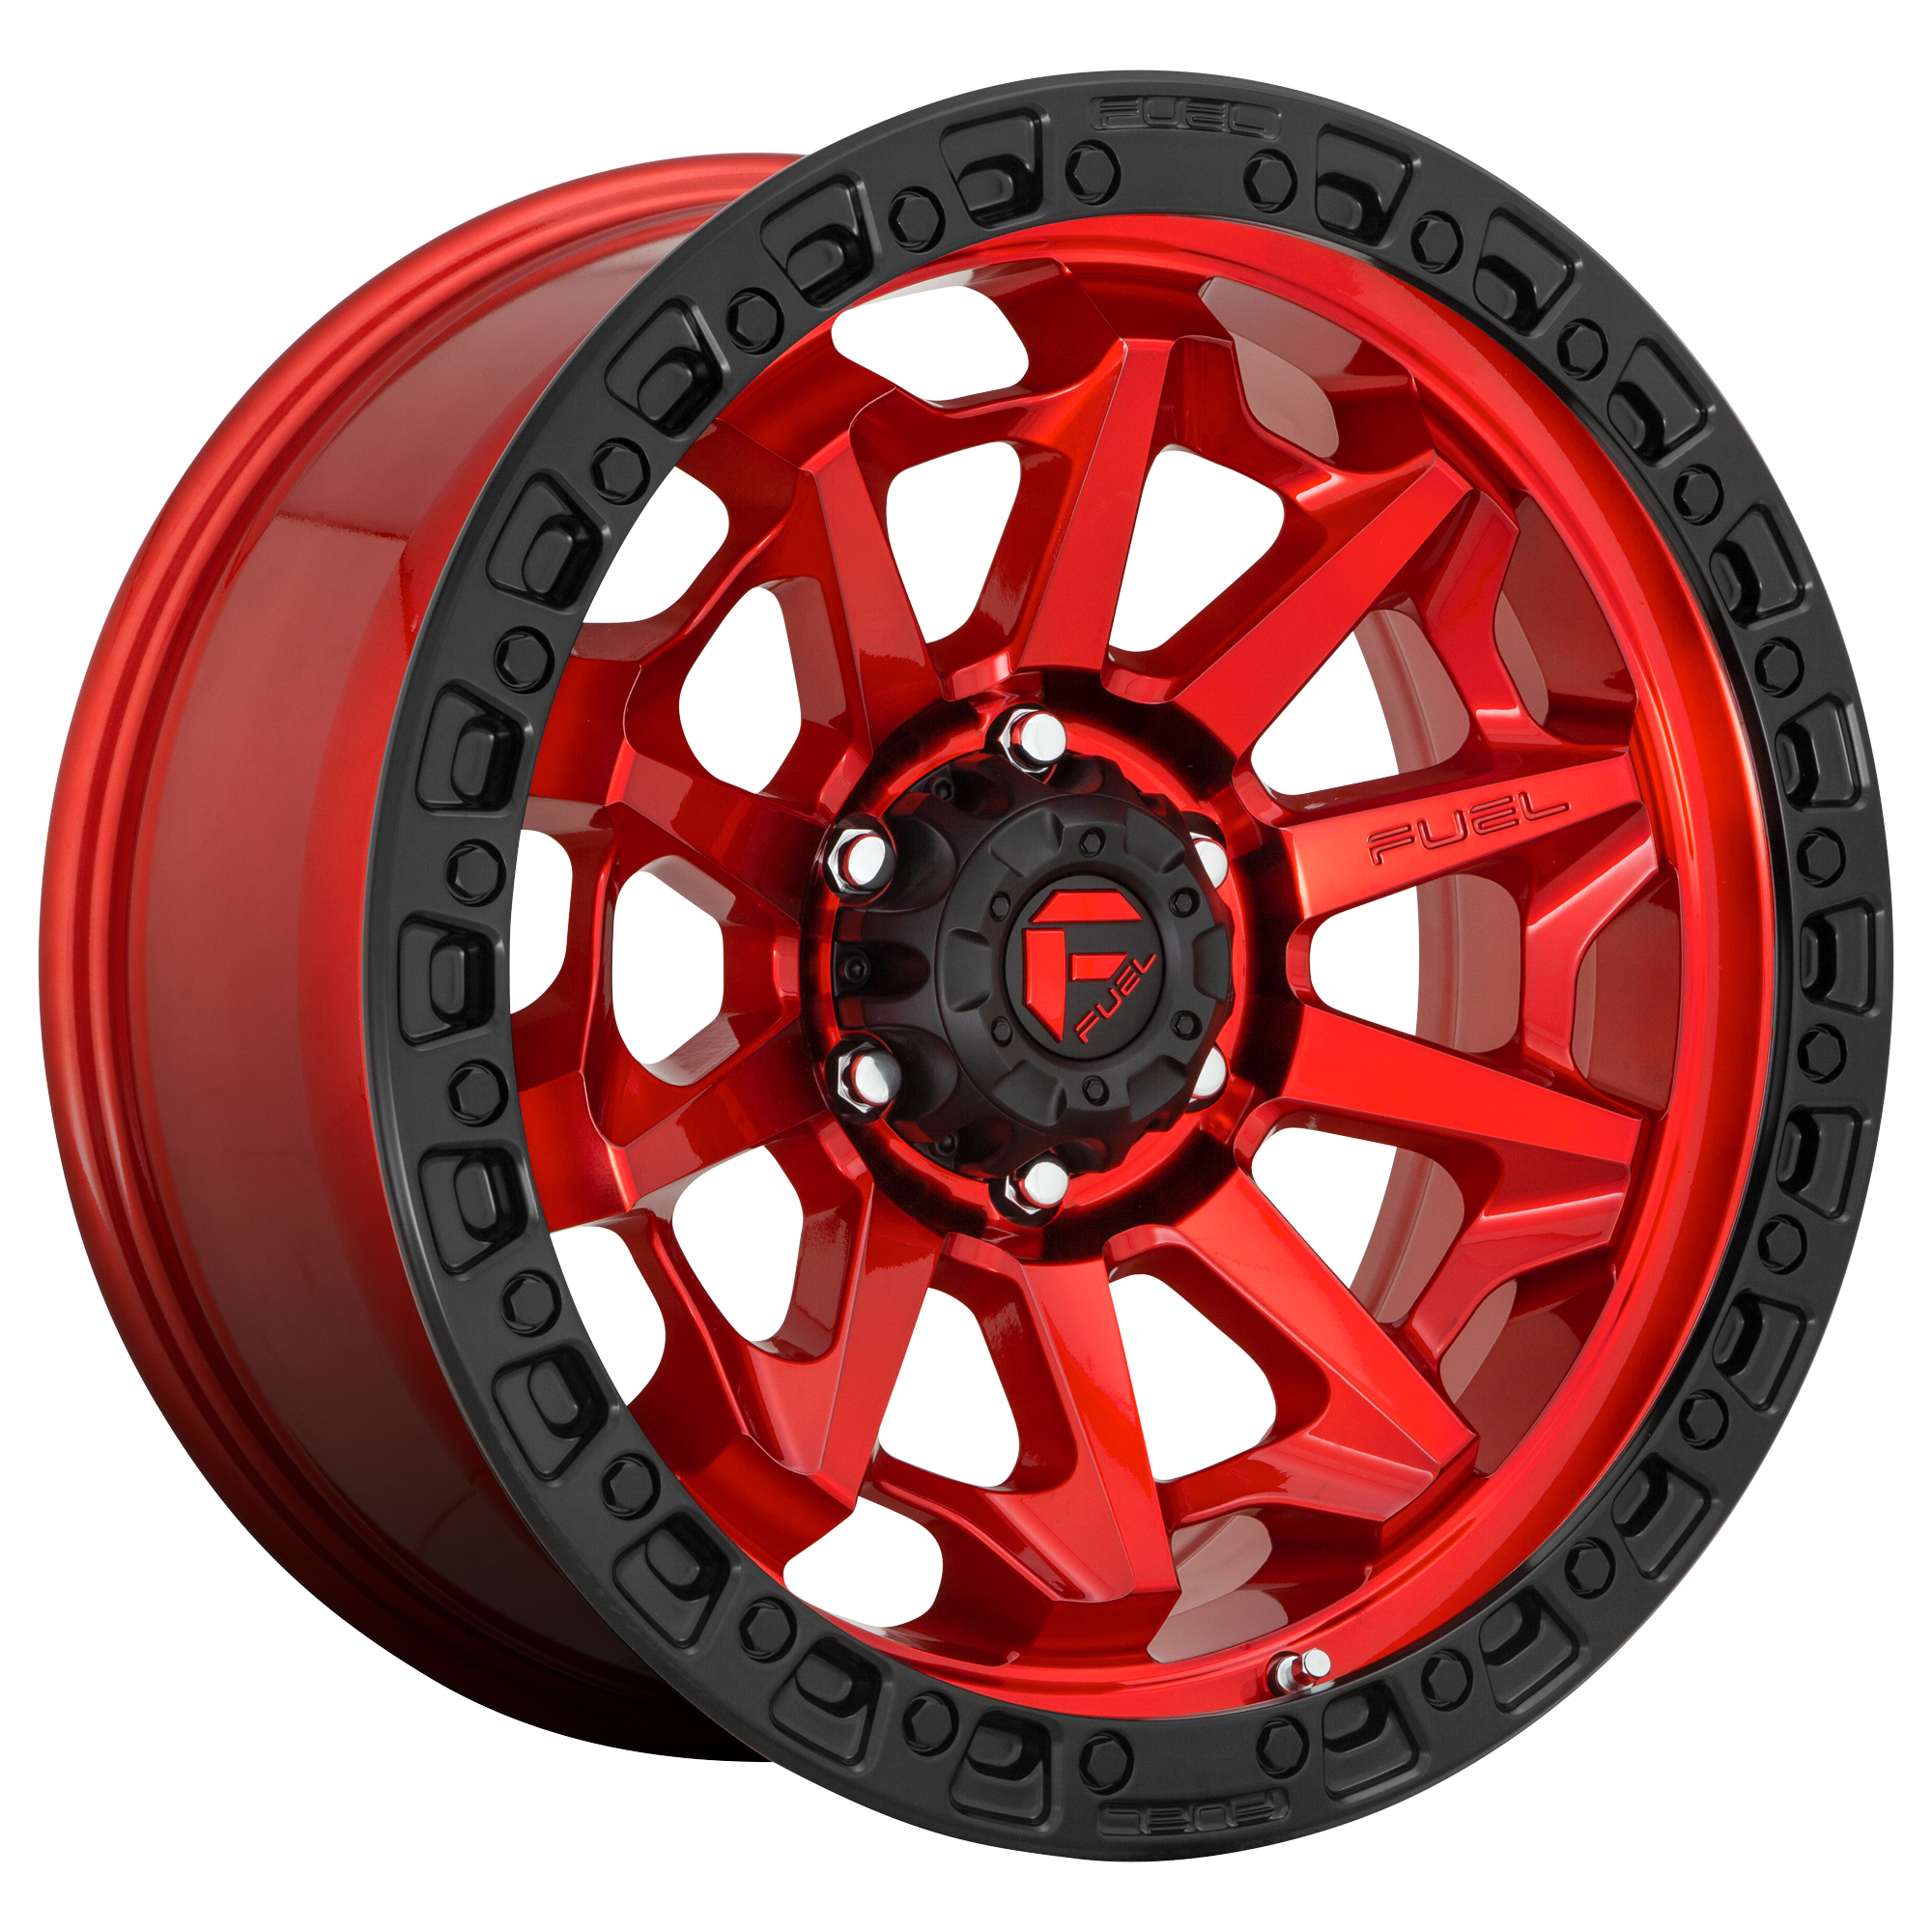 COVERT 18x9 5x127.00 CANDY RED BLACK BEAD RING (20 mm) - Tires and Engine Performance